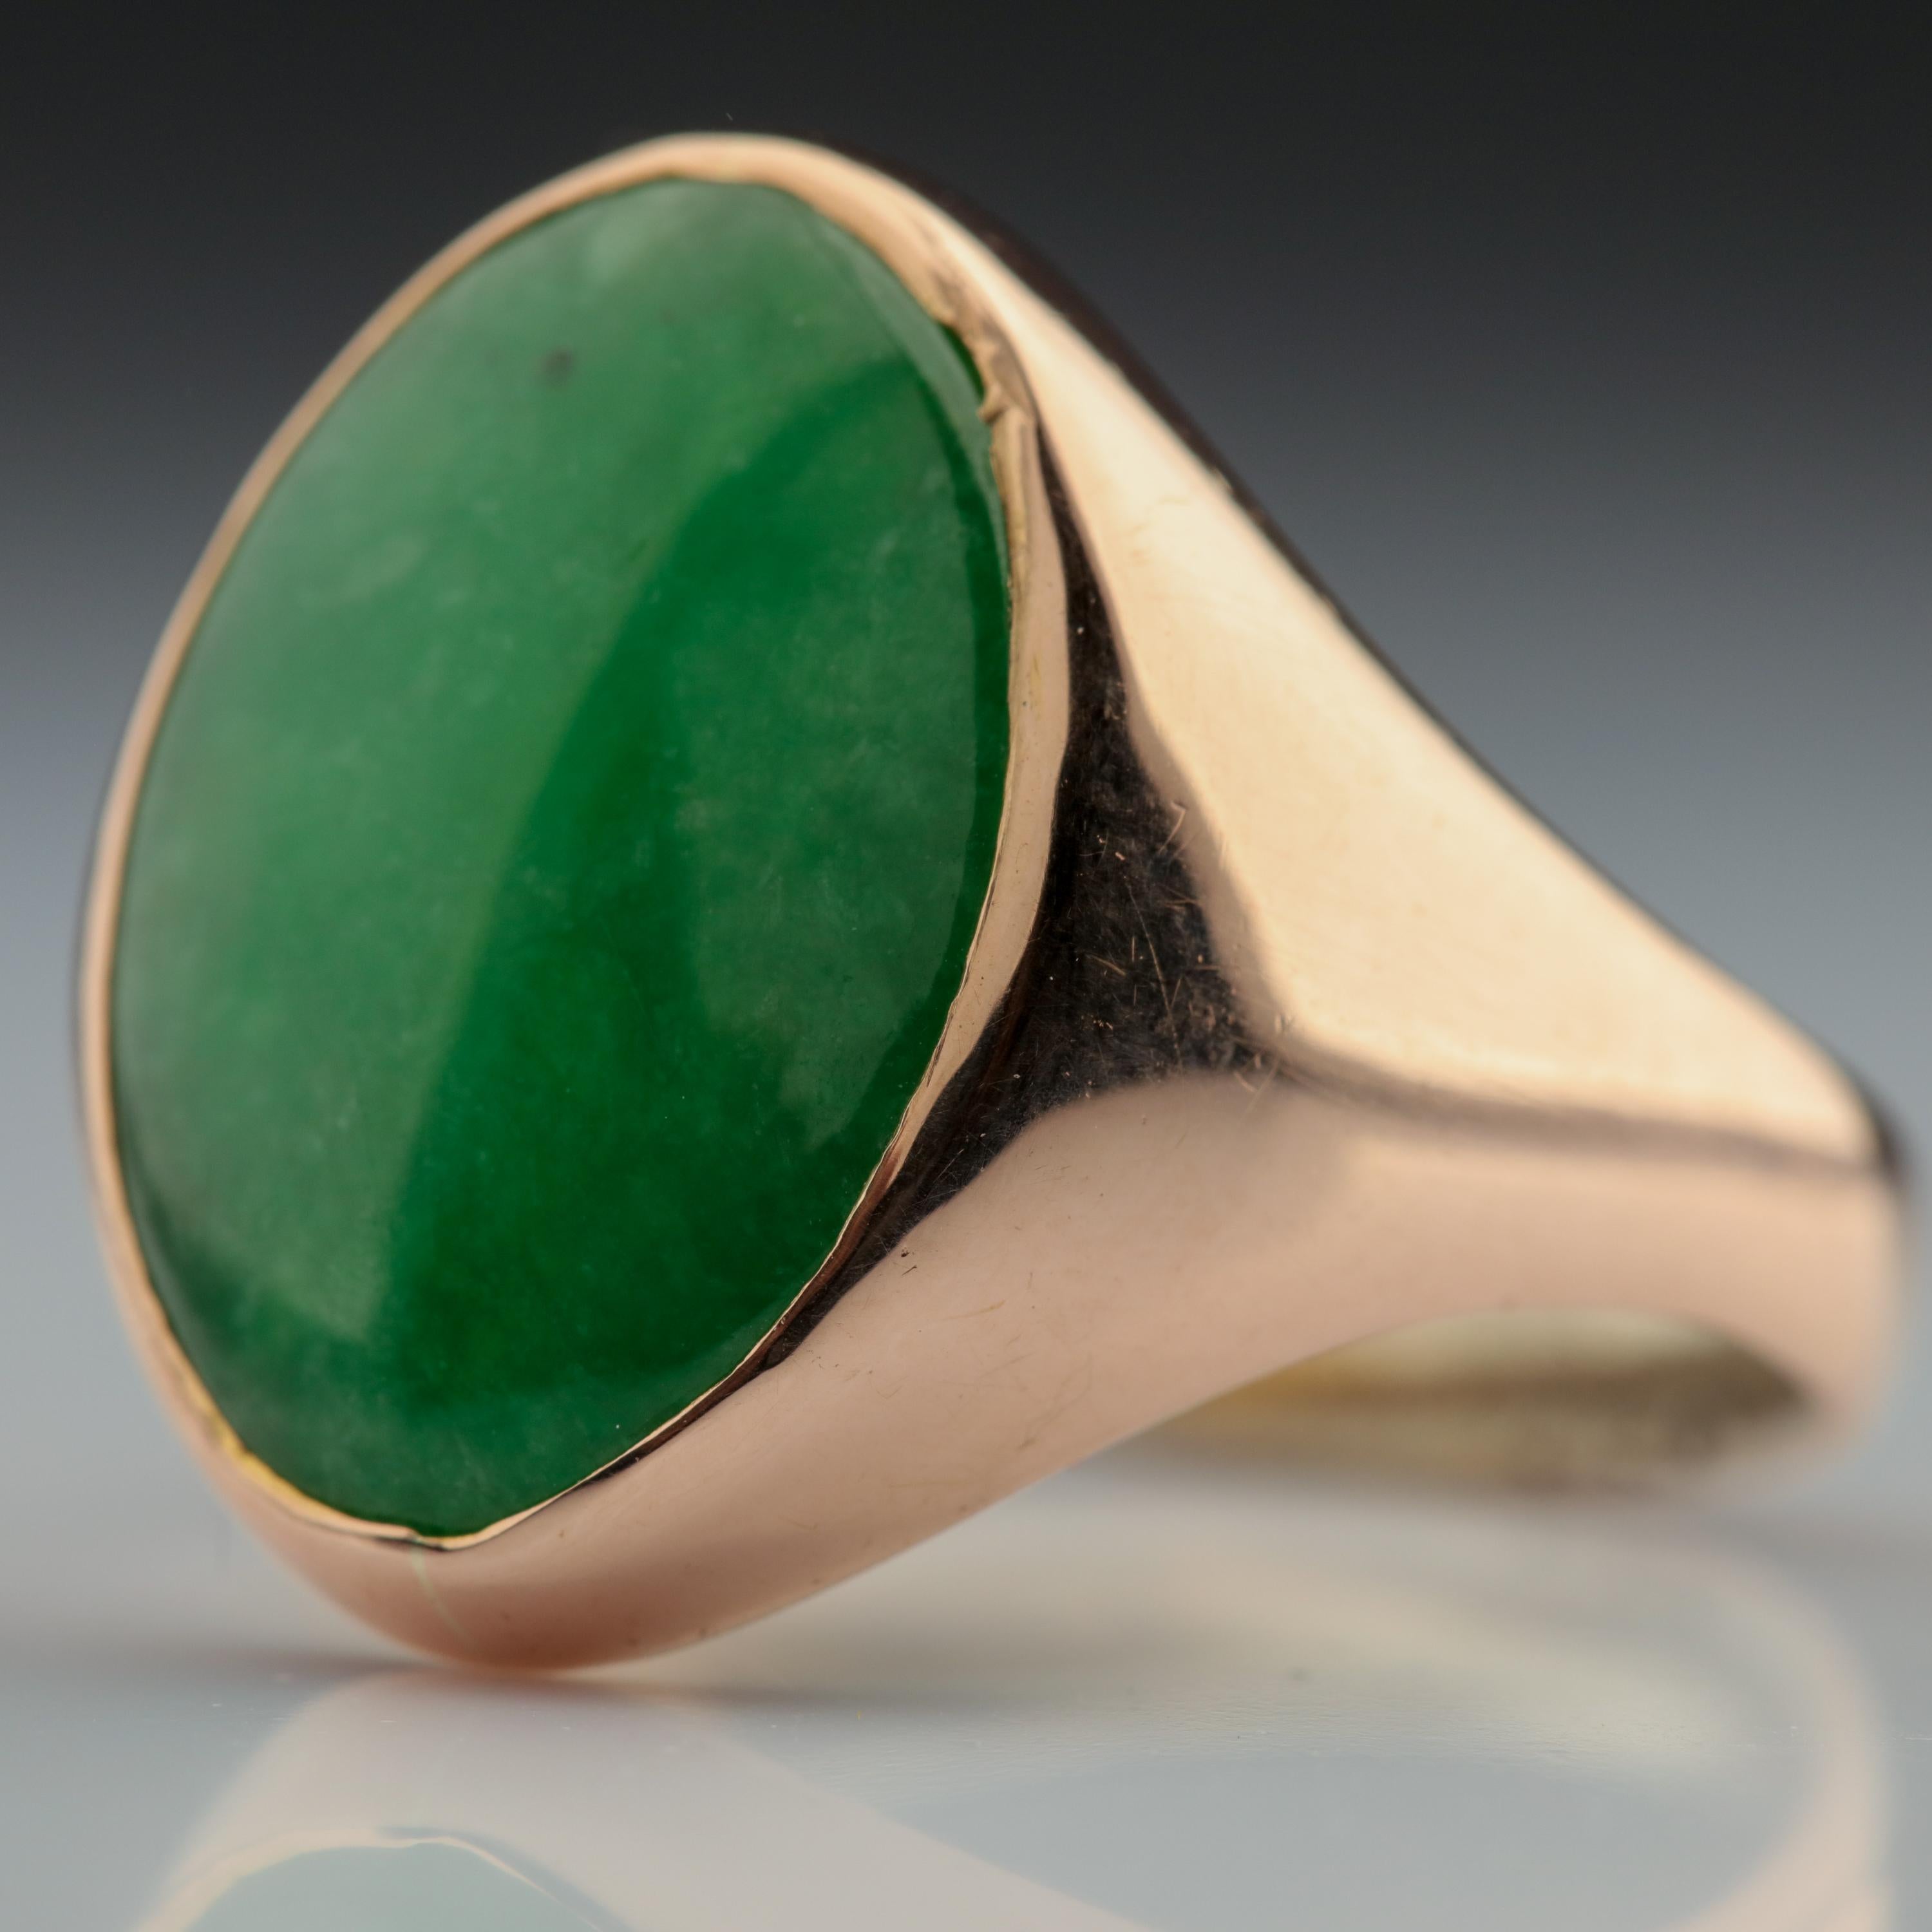 A beautiful, saturated cabochon of 100% natural and untreated jadeite jade is simply presented in this classic rose gold setting from the Retro era of the 1940s. The jade is a deep, evenly-toned forest-green that features a gleaming high-polish. The